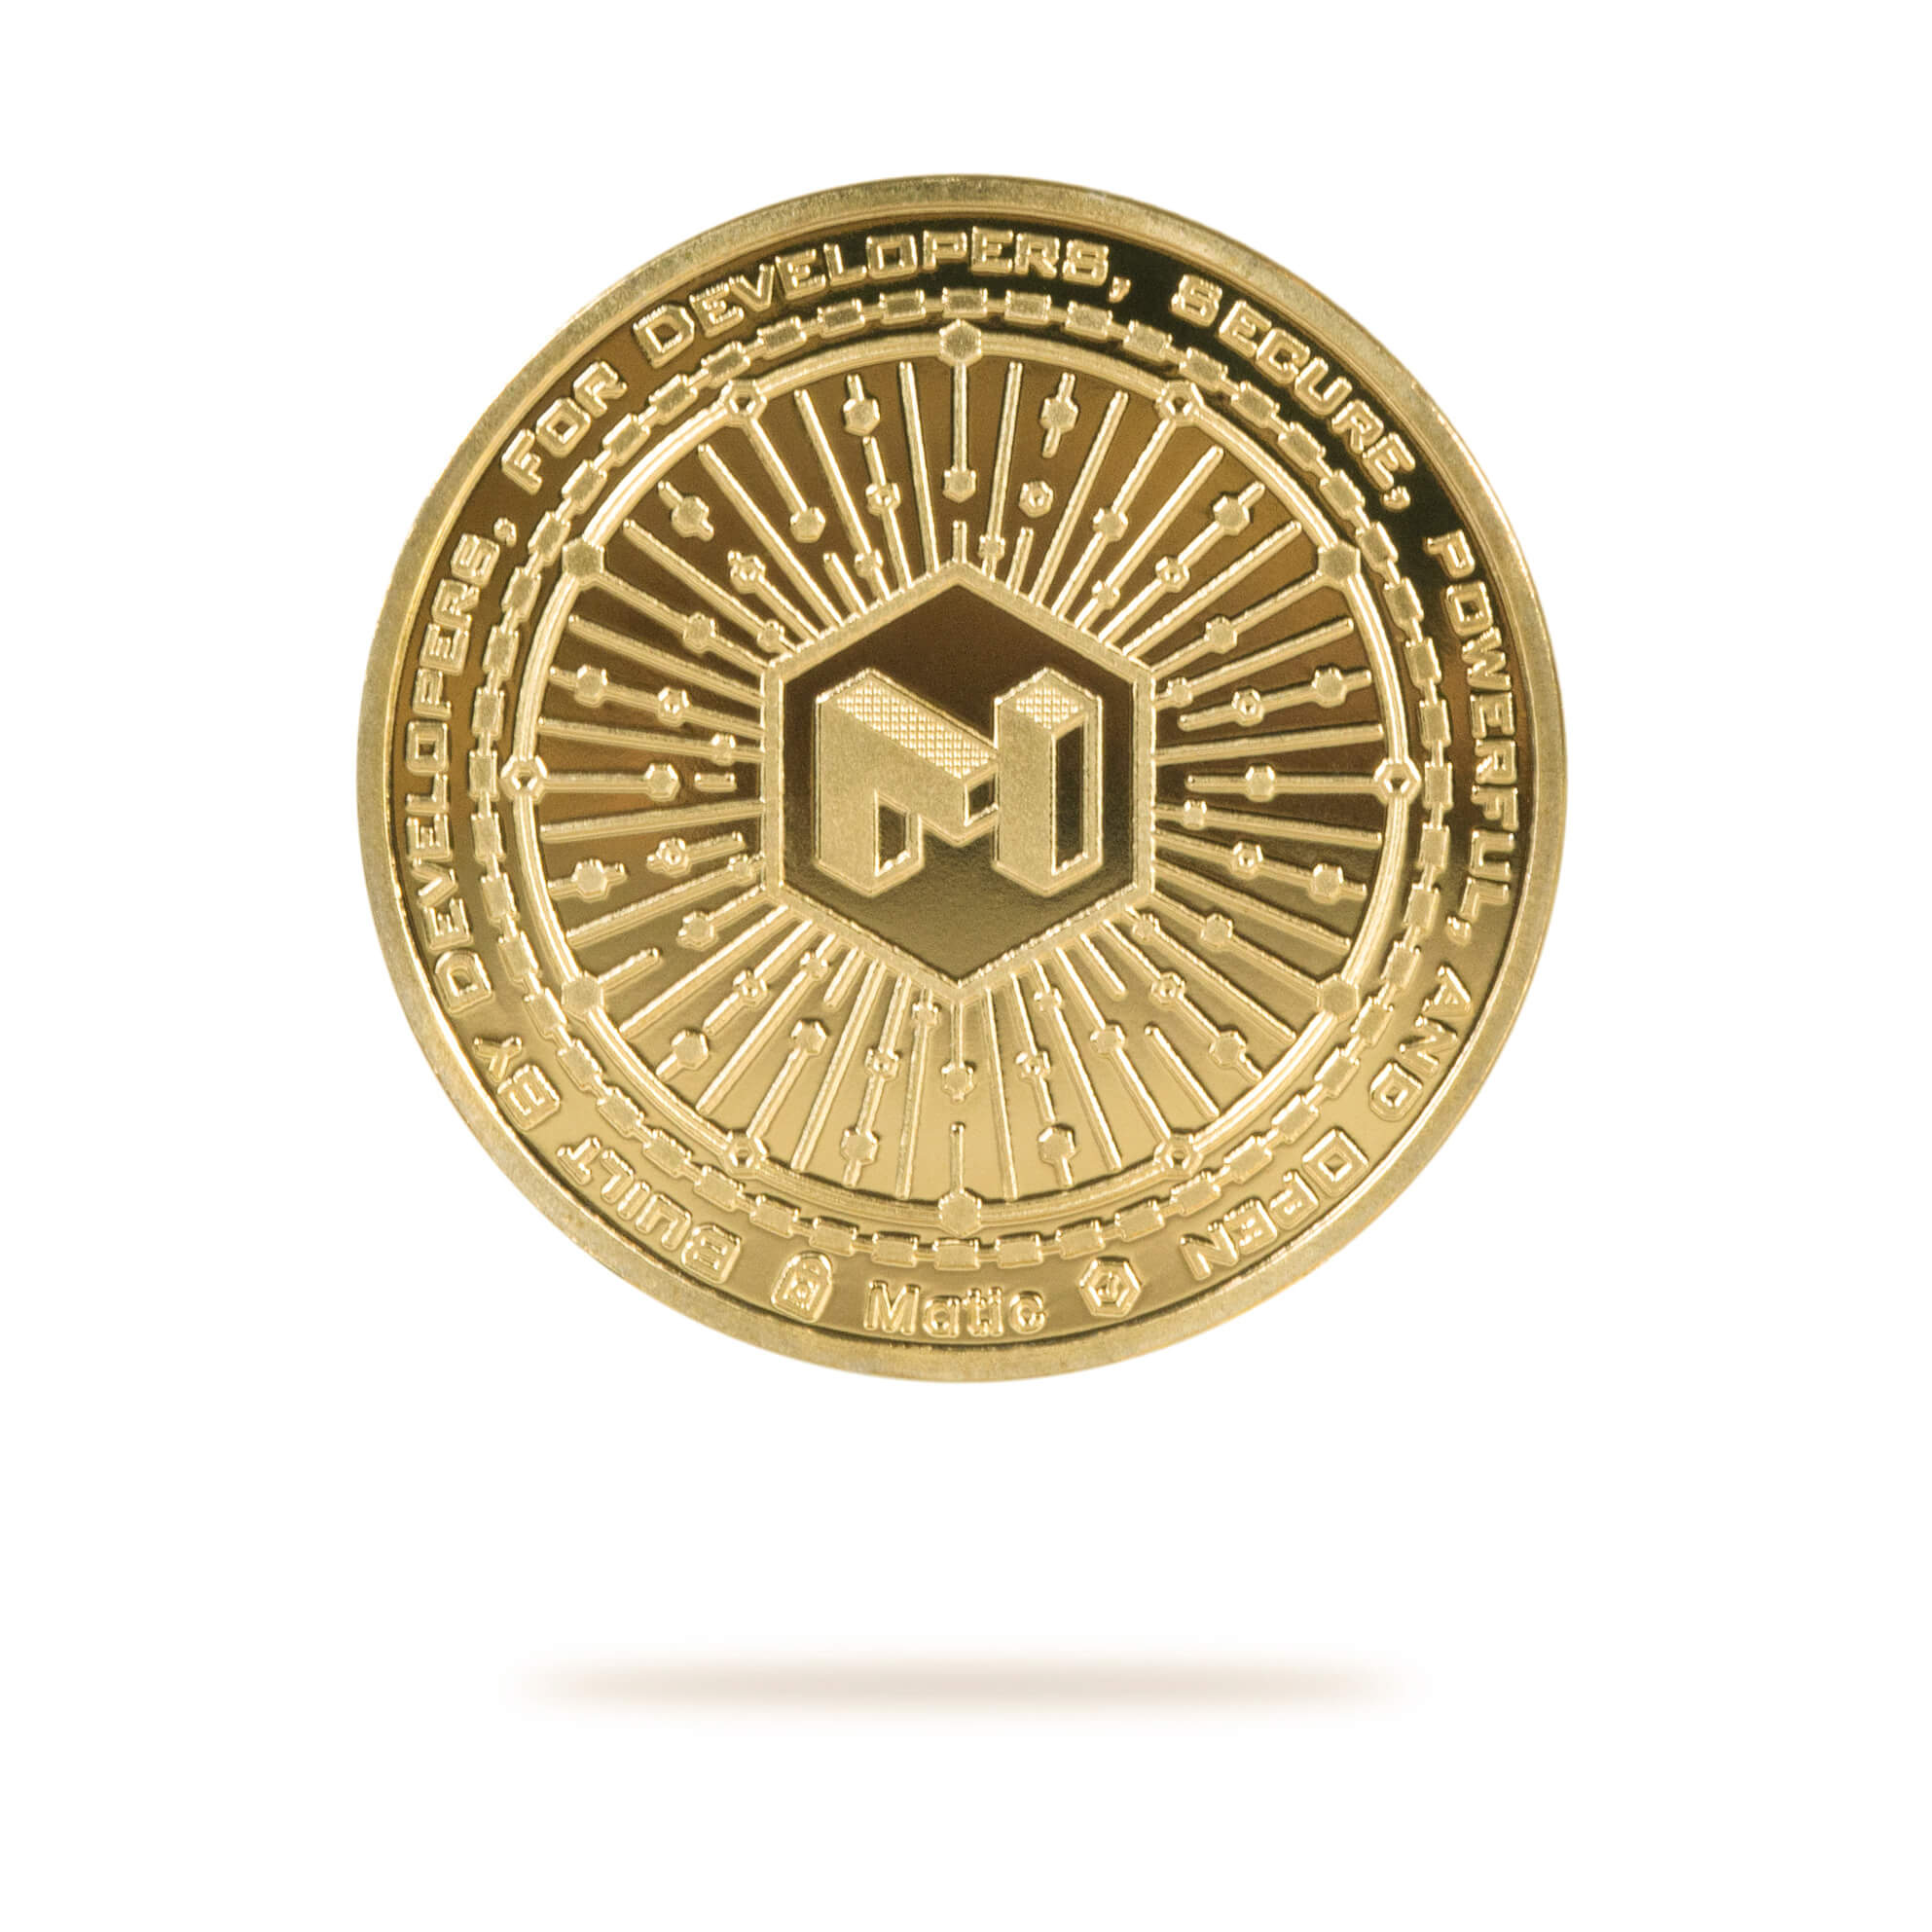 Cryptochips | Polygon Physical Crypto Coin. Collectable cryptocurrency merch you can hodl